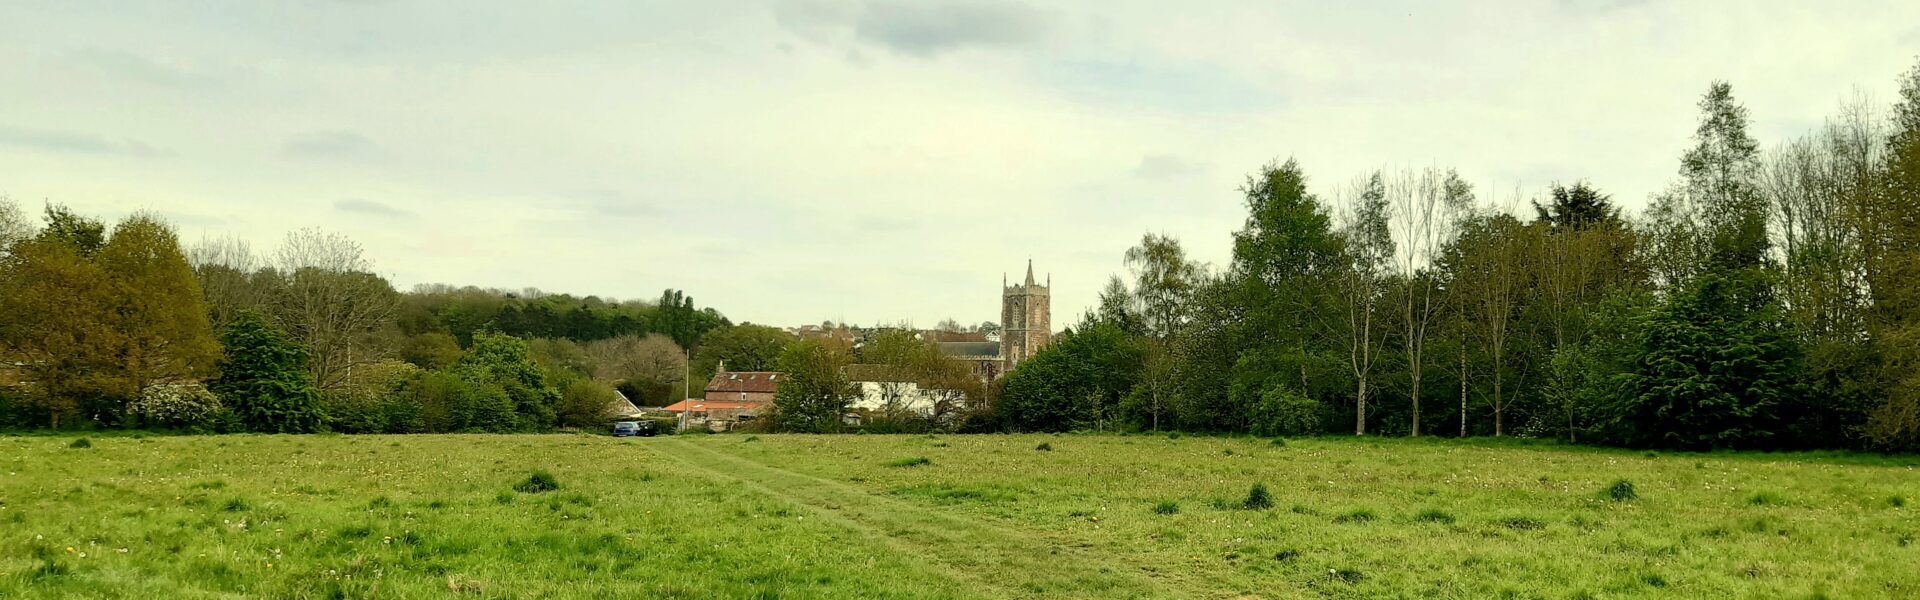 A photograph of a view across the Centenary Field Meadow, overlooking St. Peter's Church.